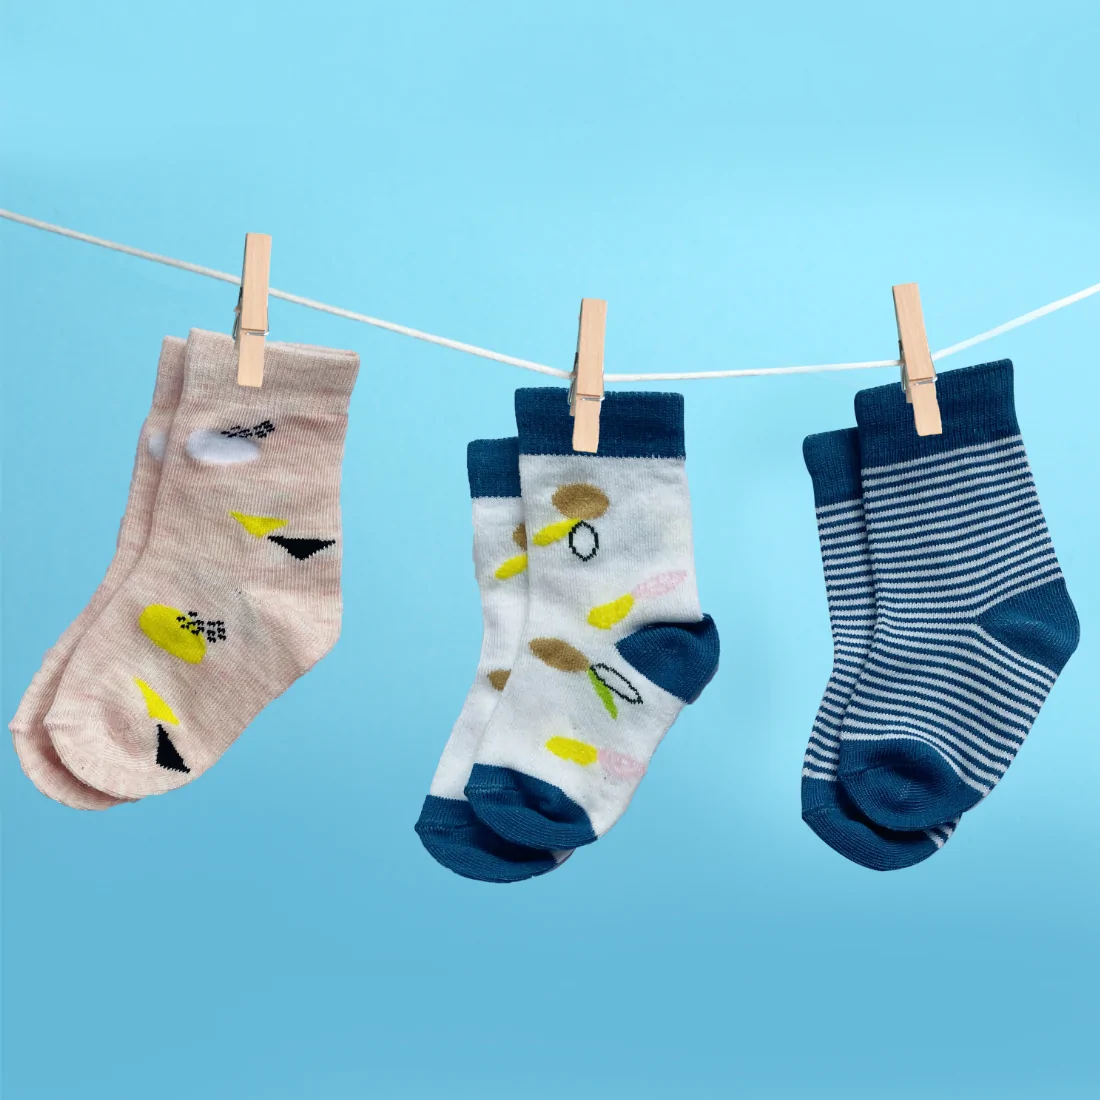 Mylo Antibacterial Baby Socks - Elasticated & Ankle Length - (0-6 Months) Unisex Blue Striped & Floral